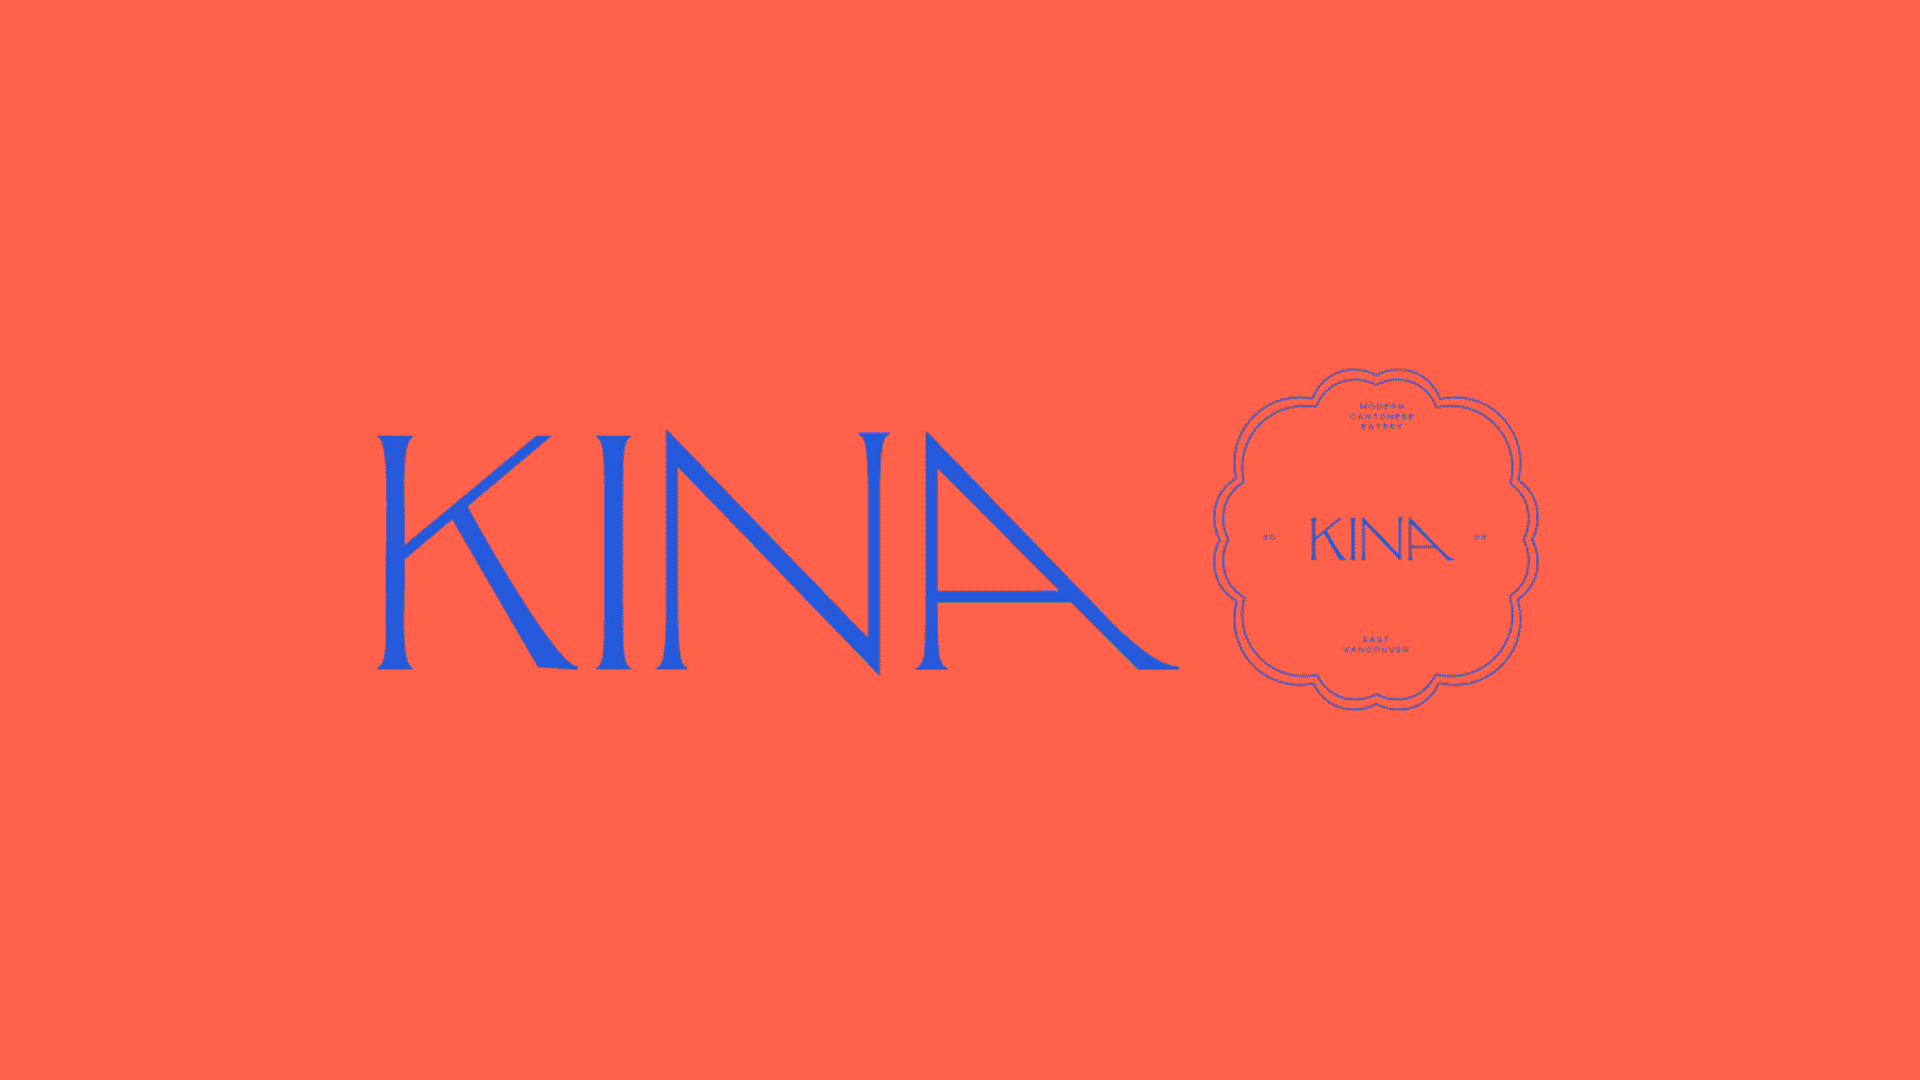 Starting with Kina’s logo, images of restaurant branding such as menus, coasters, and social media assets, cycle through on red and dark brown backgrounds